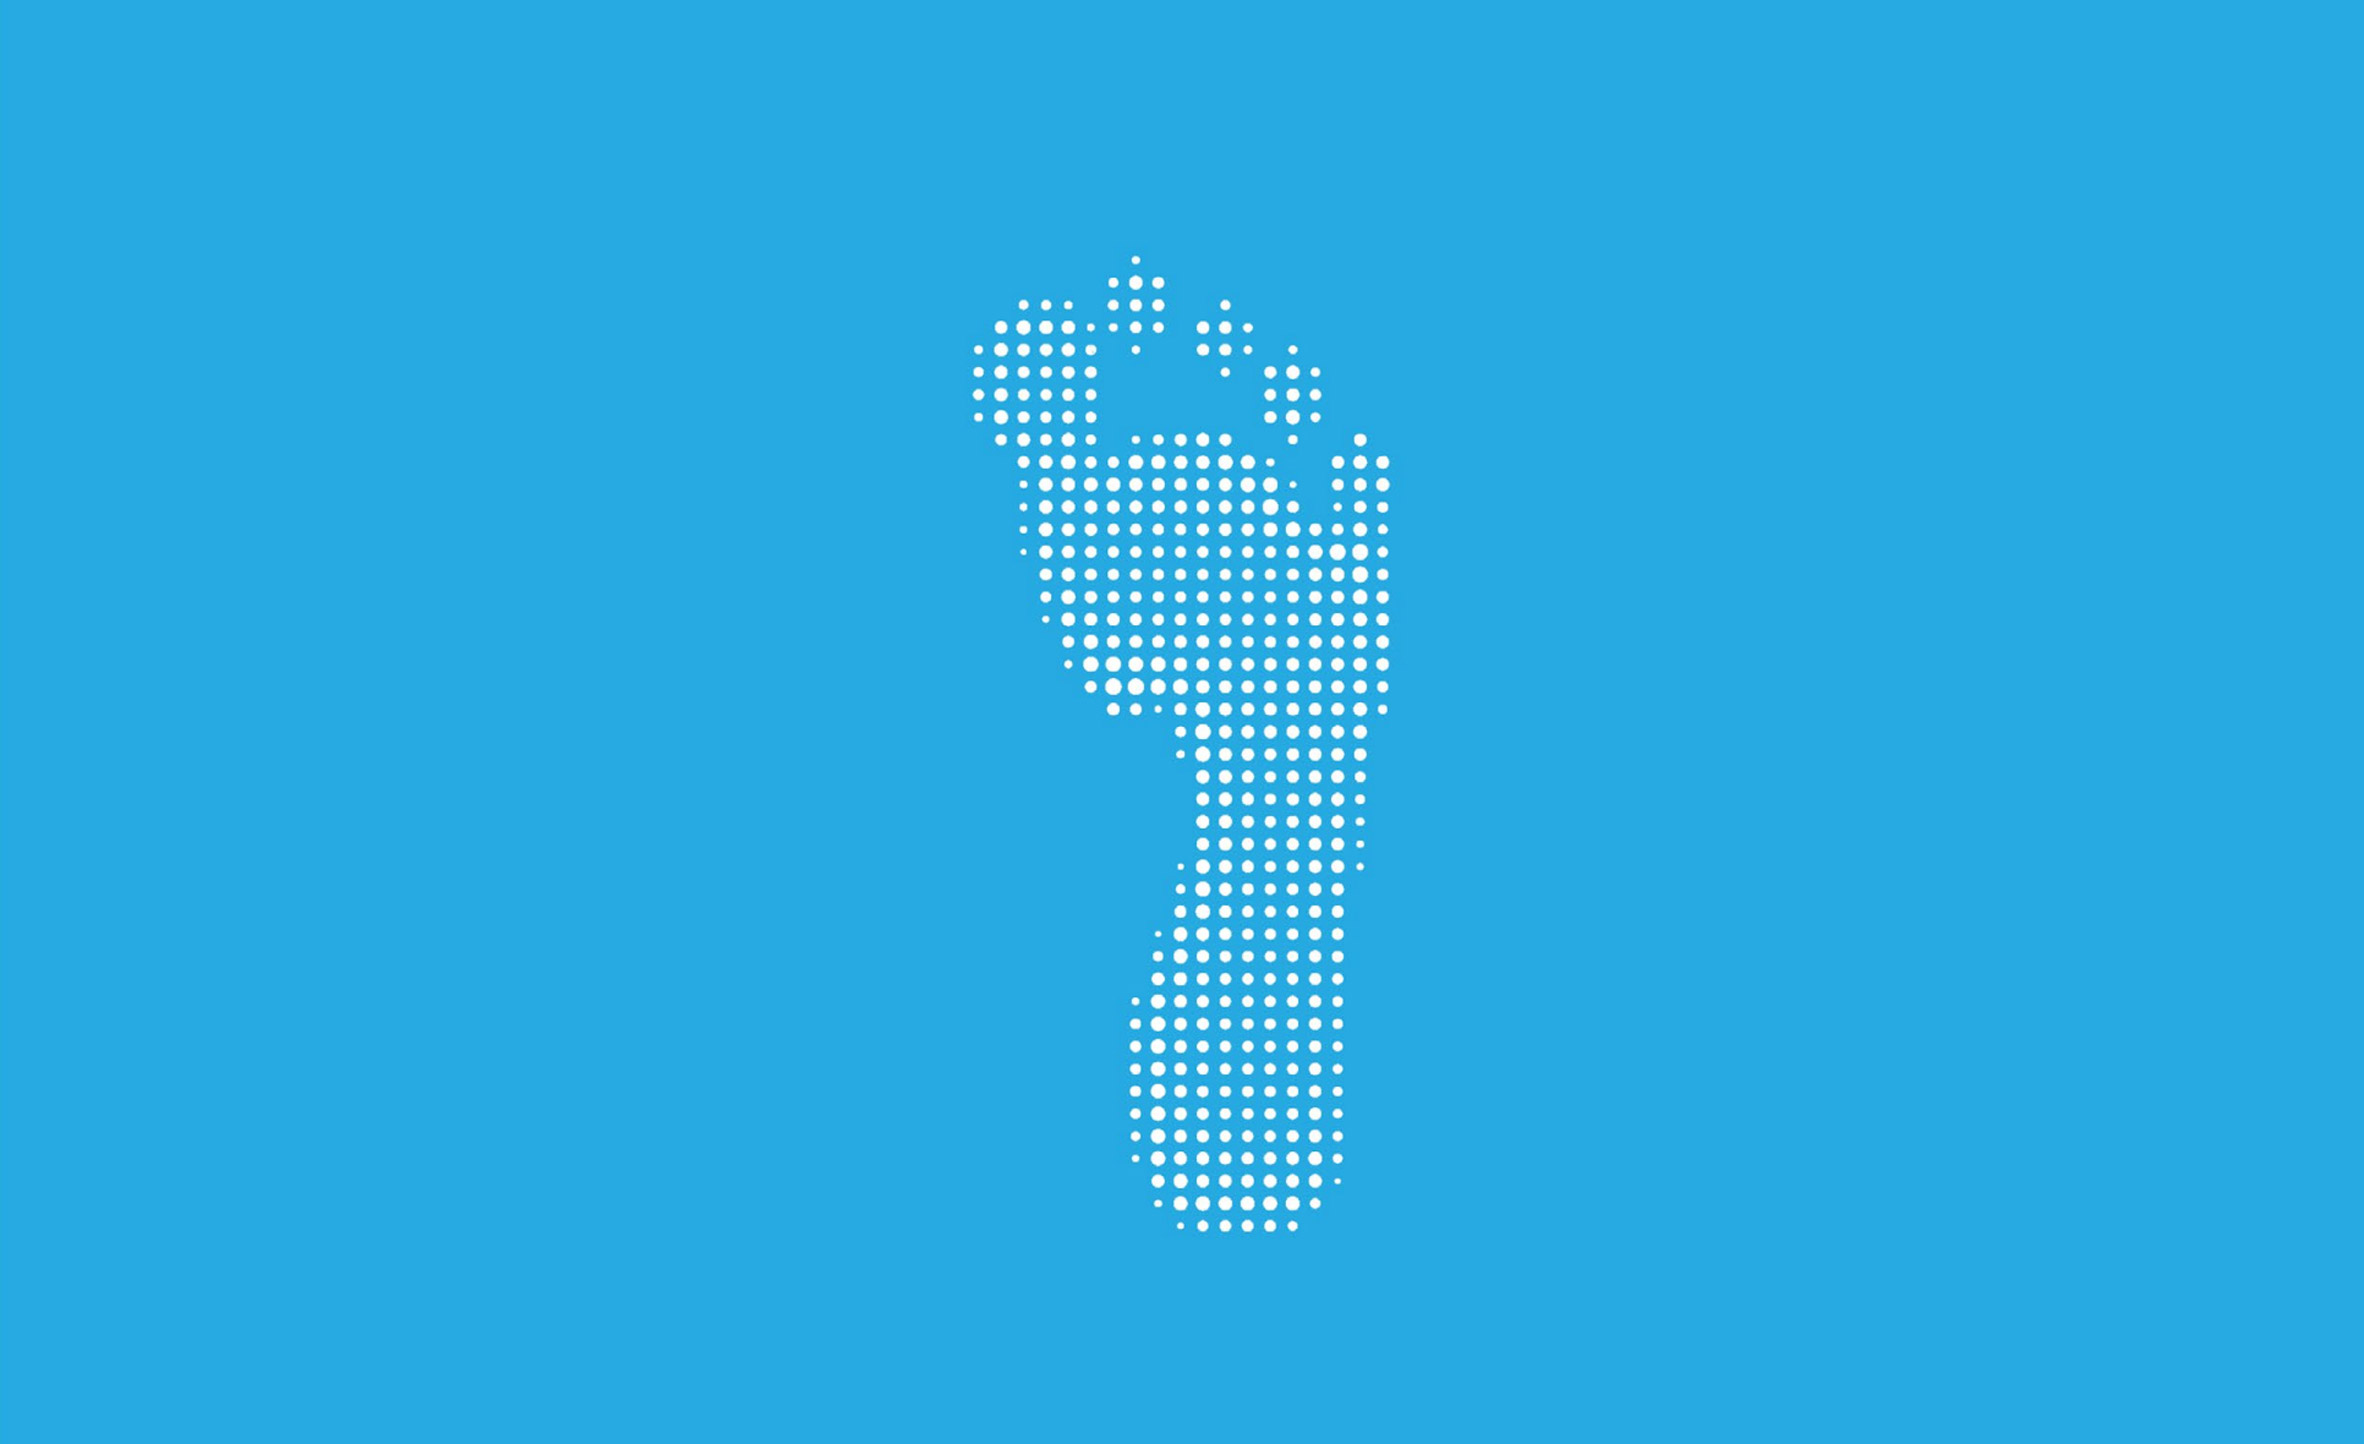 Ai Weiwei designs blue footprint flag to encourage people to celebrate the 70th anniversary of the Universal Declaration of Human Rights